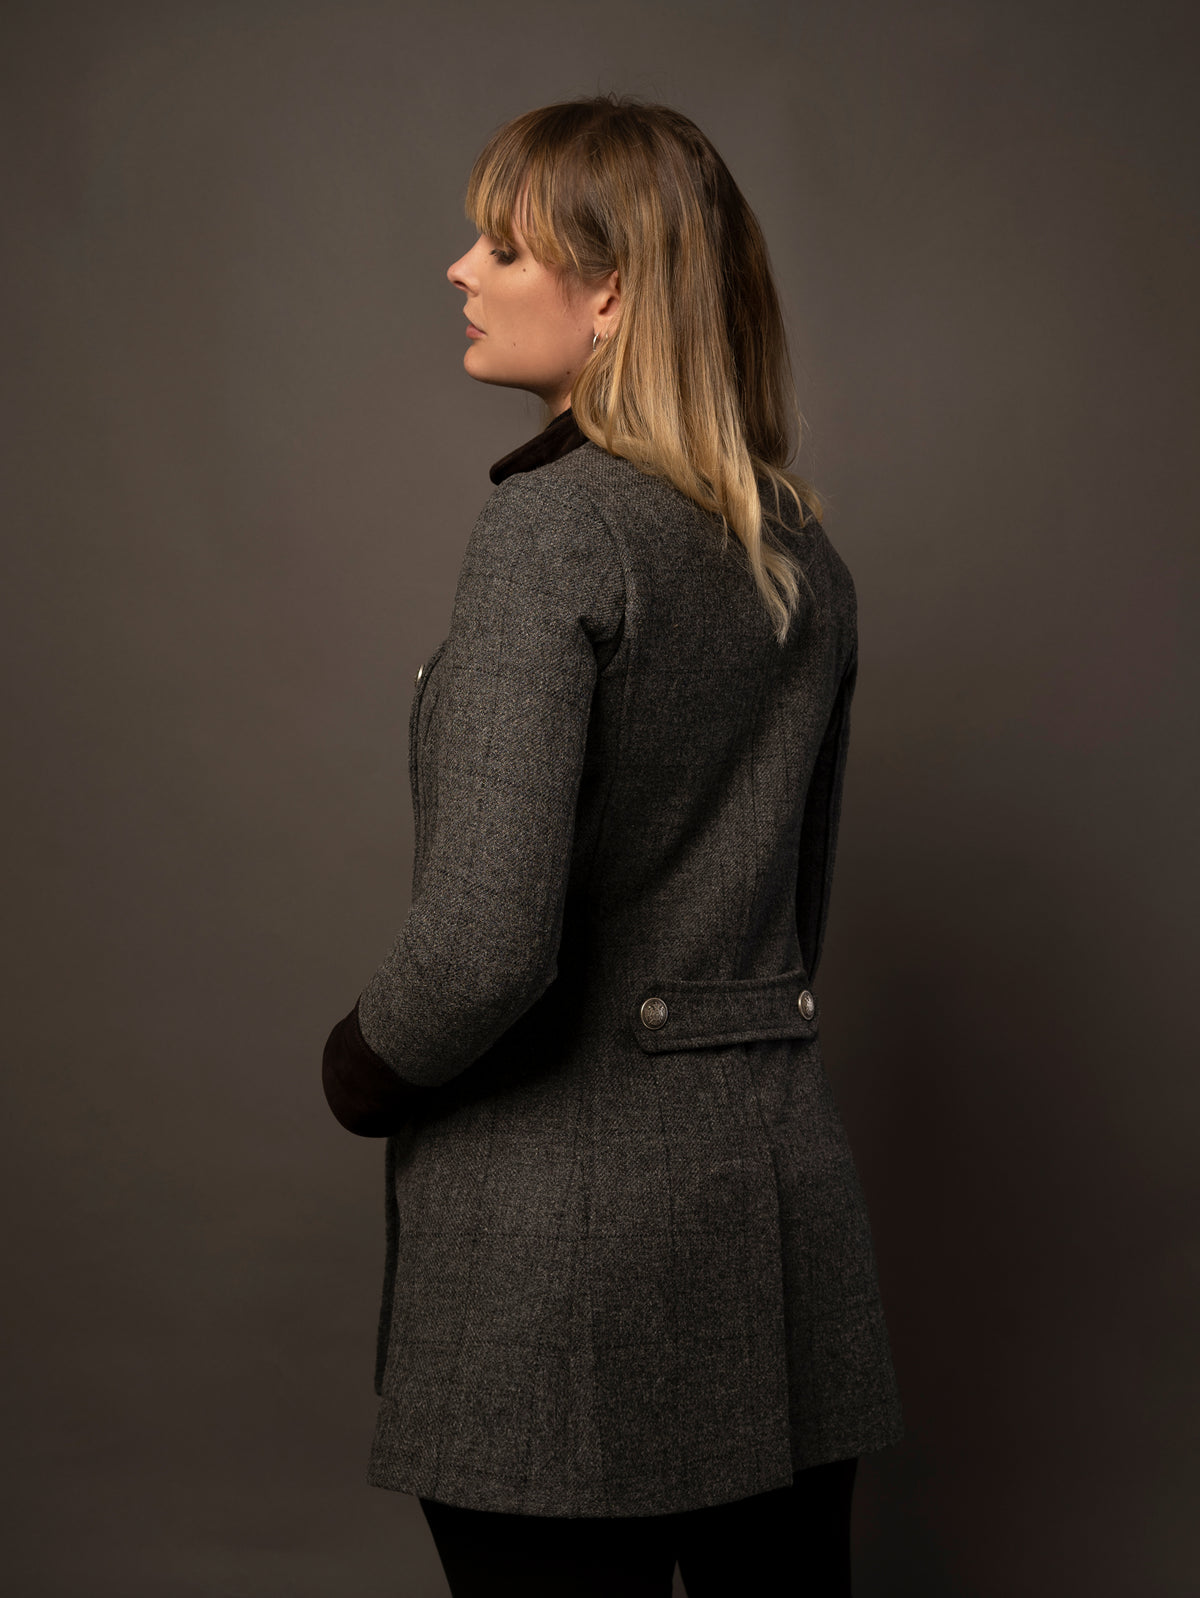 grey tweed and suede coat in a military style. made in the uk